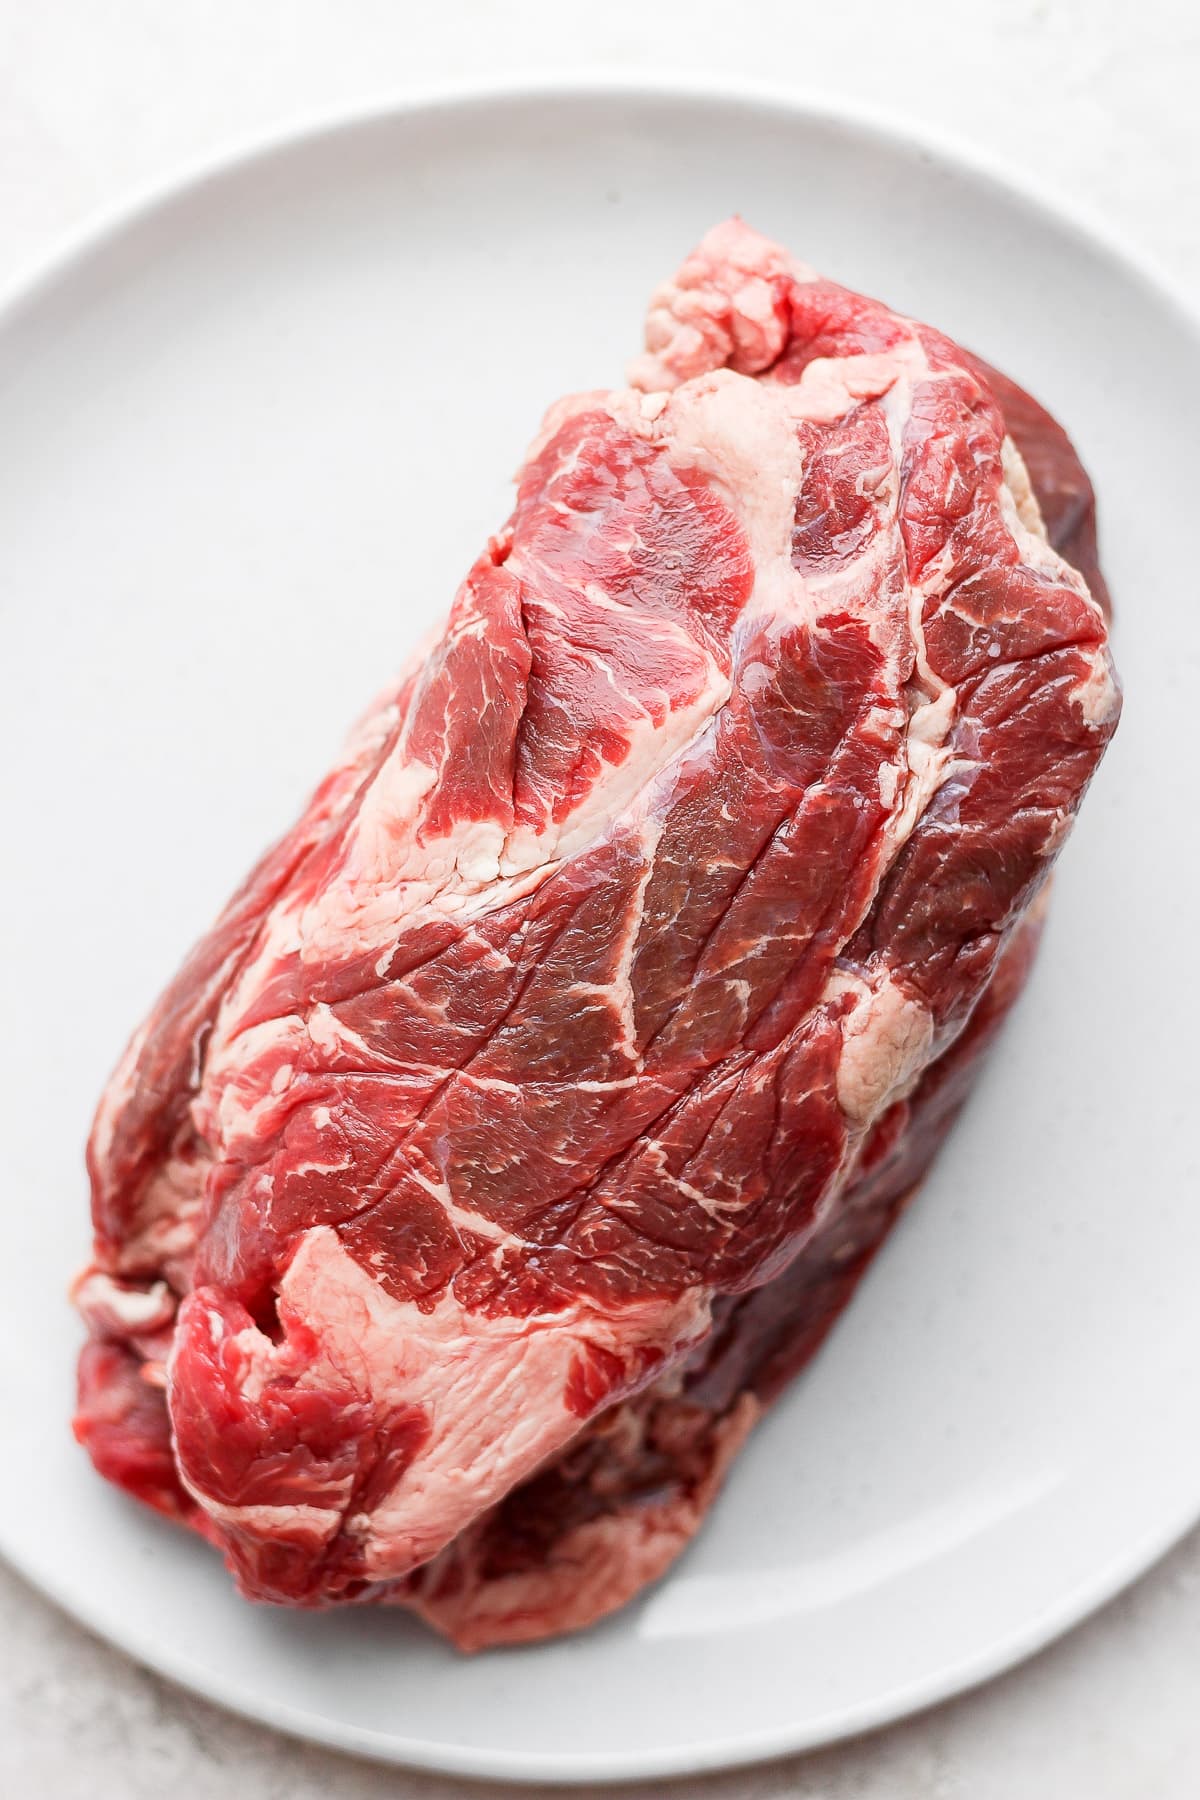 A beef roast on a plate, uncooked.